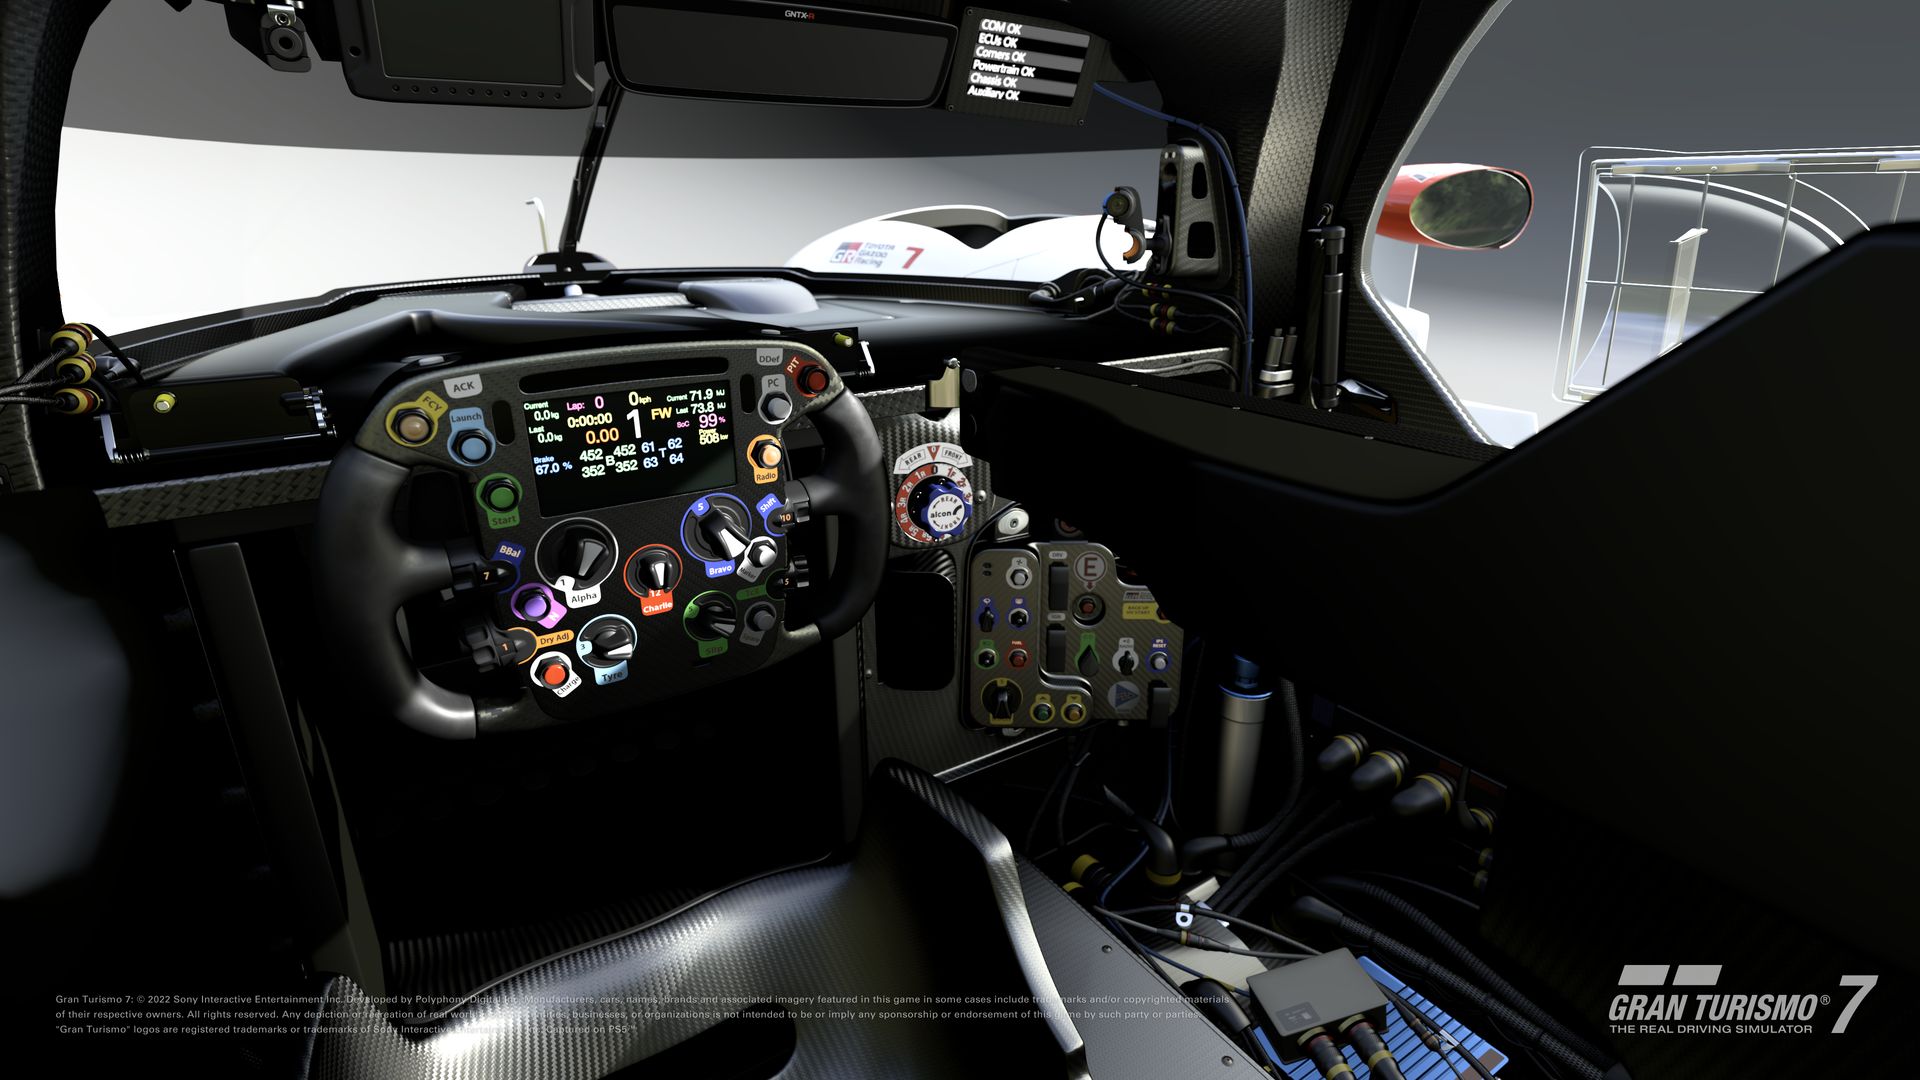 Gran Turismo 7 - Free May Update Released - Three New Cars - Bsimracing